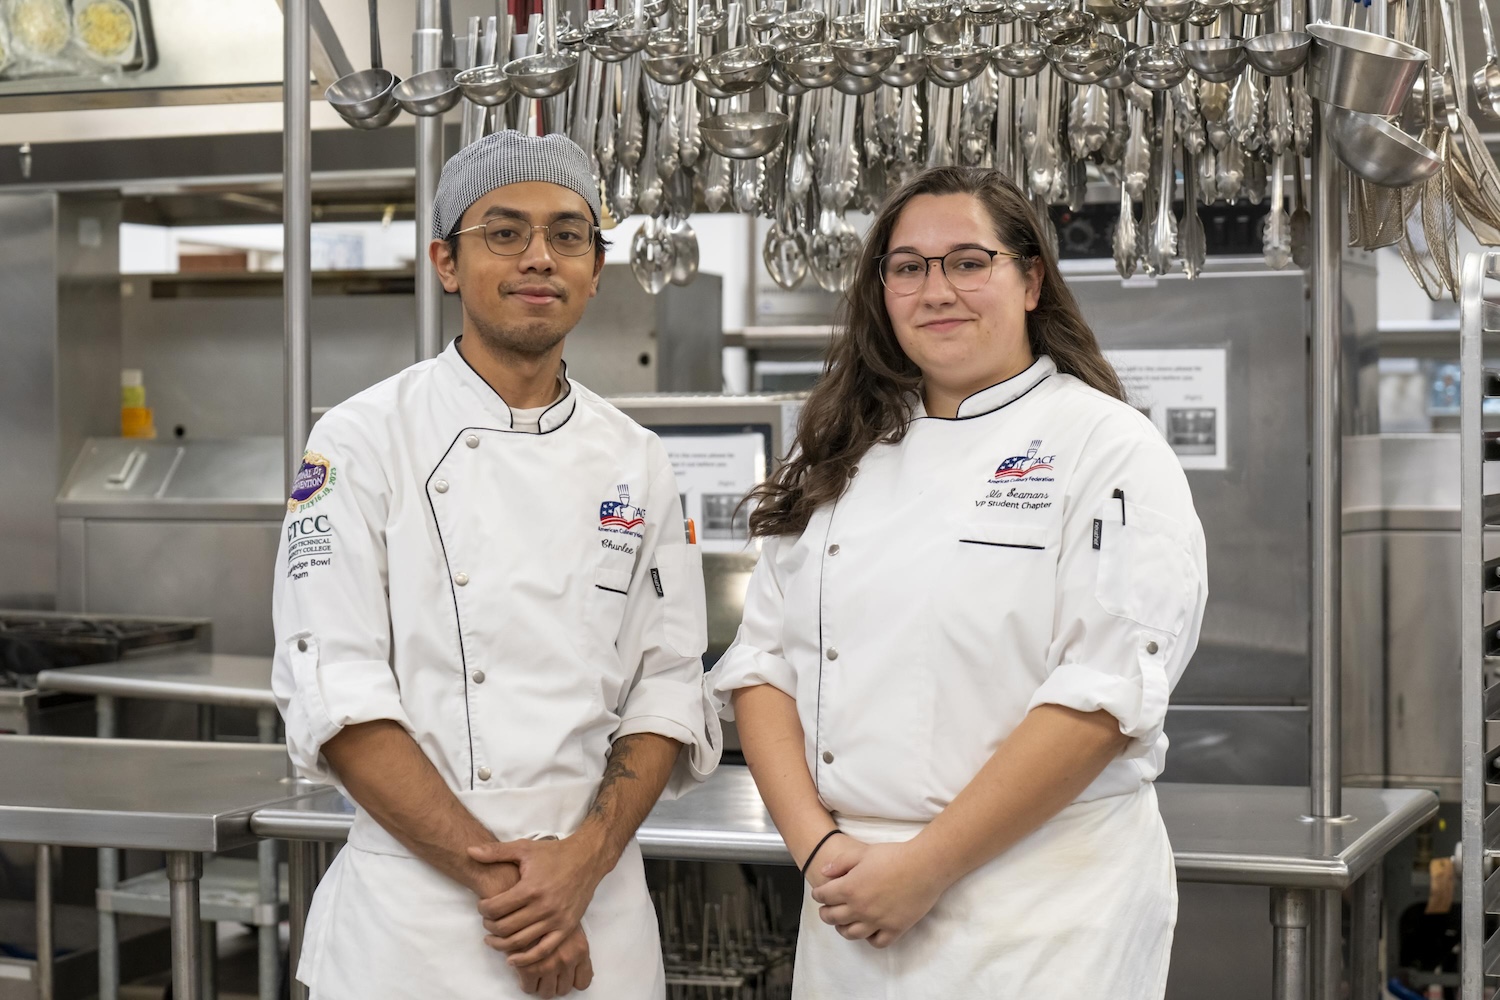 Chunlee Tith (left) and Ila Seamans pose for a photo in one of the GTCC kitchen.